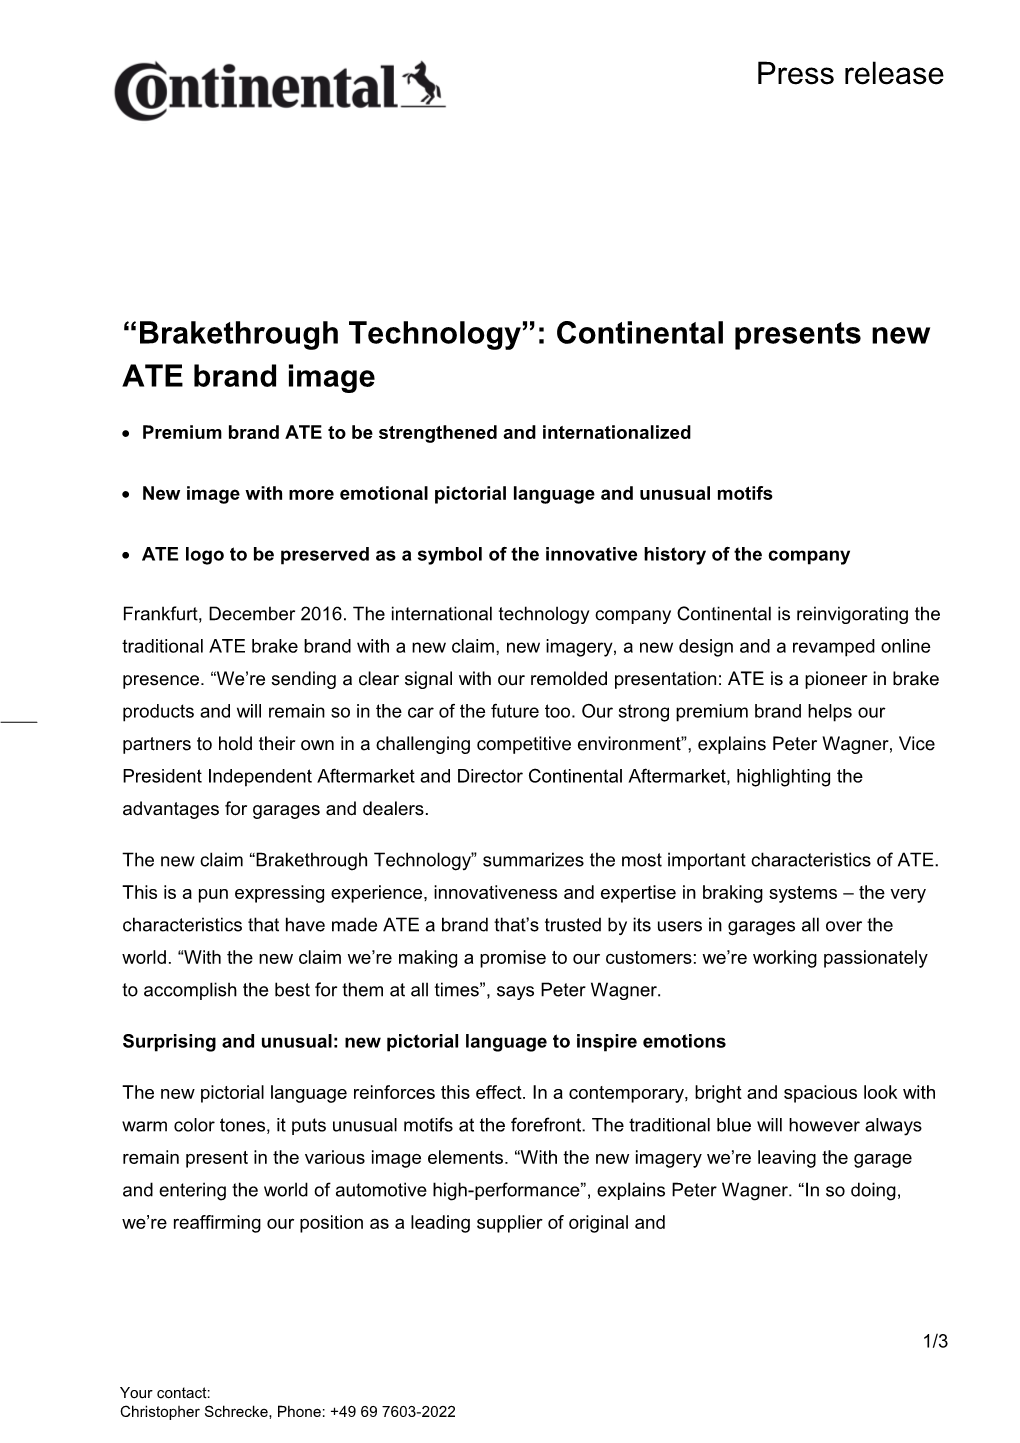 Brakethrough Technology : Continental Presents New ATE Brand Image